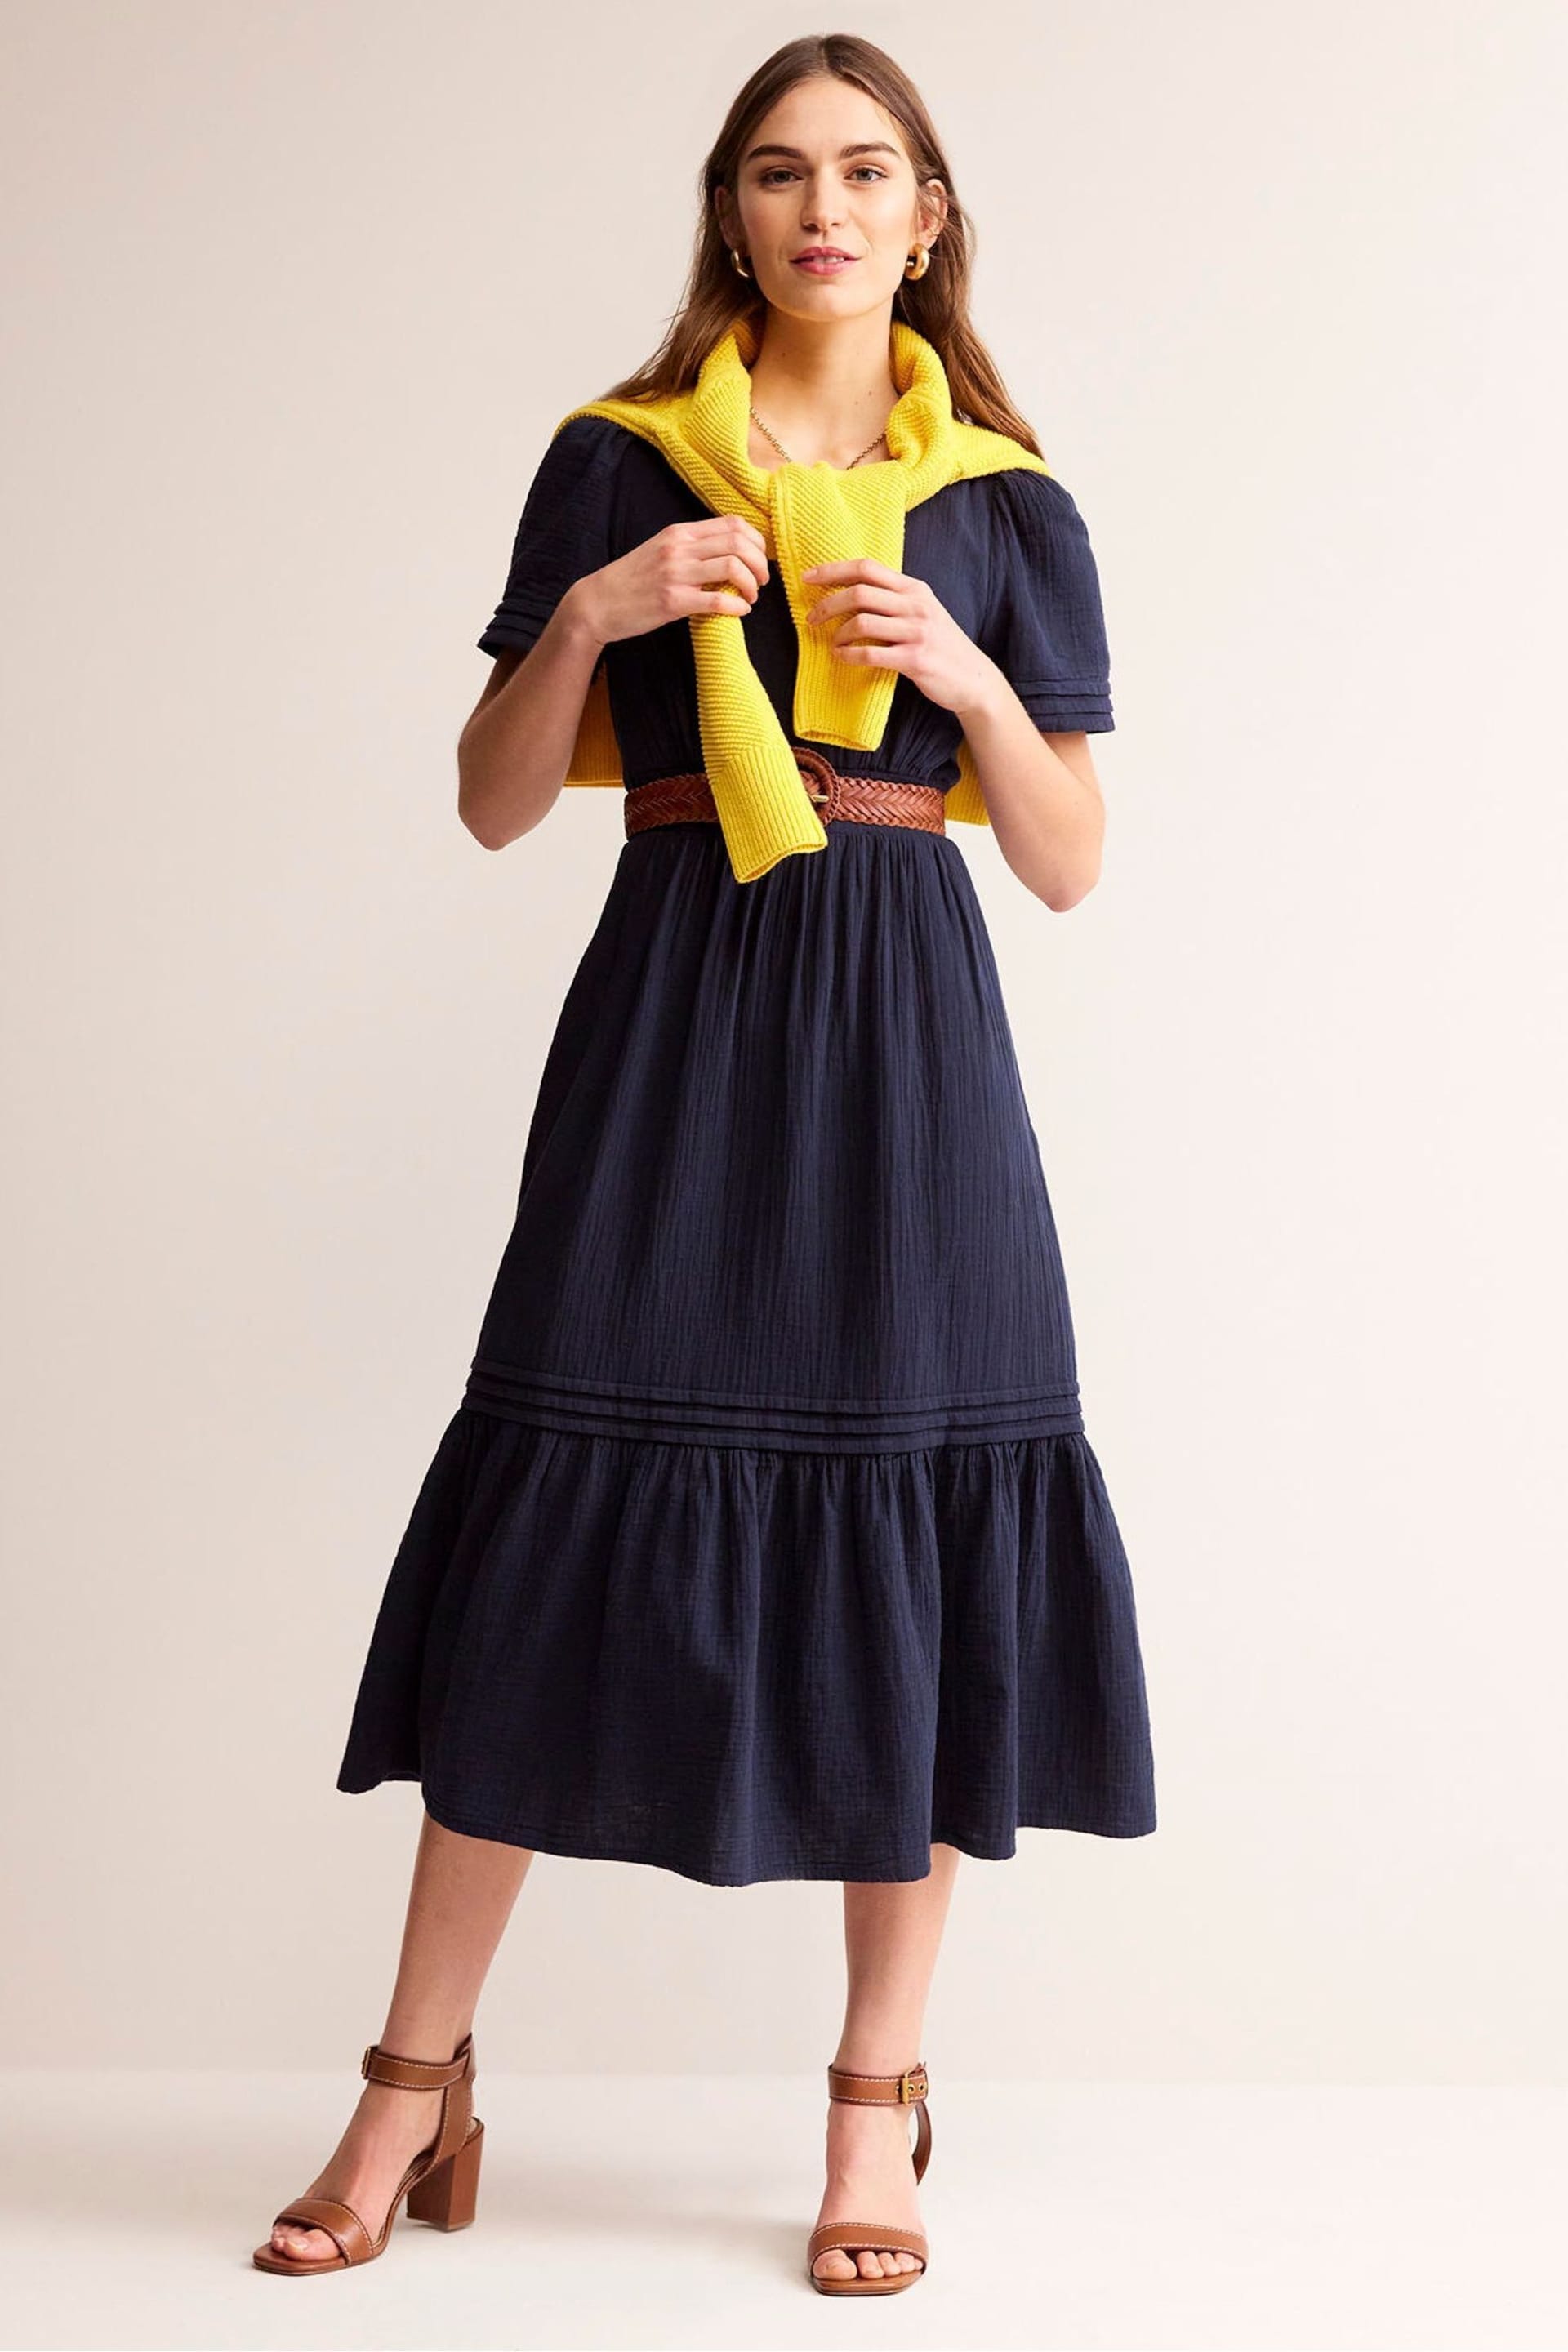 Boden Blue Eve Double Cloth Midi Dress - Image 5 of 7